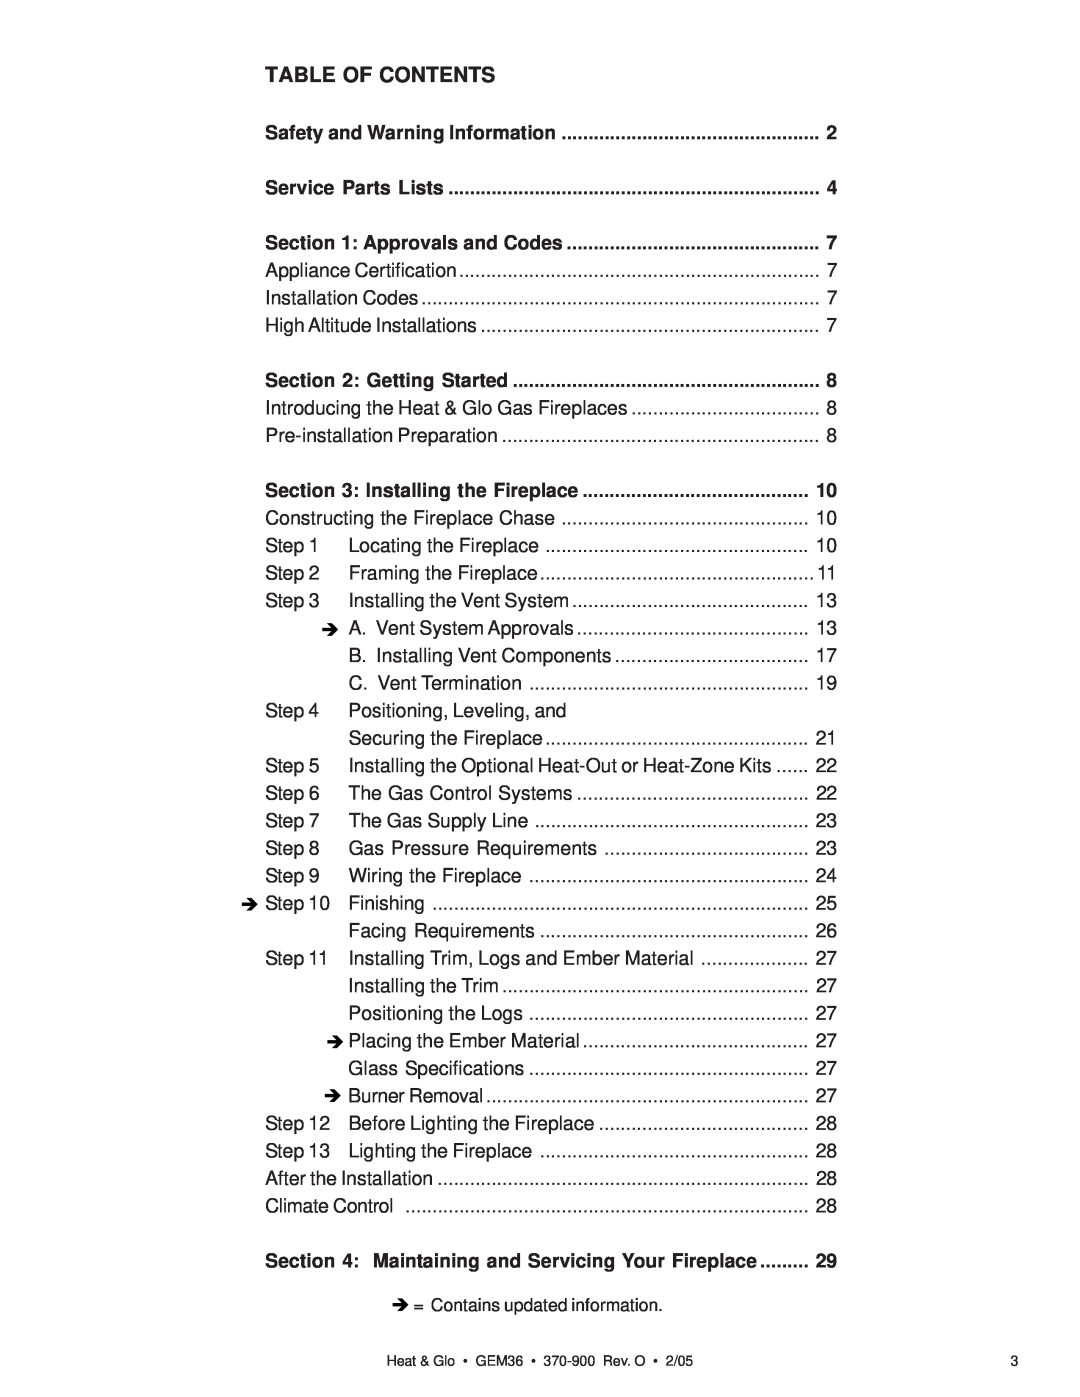 Heat & Glo LifeStyle GEM36 manual Table Of Contents 